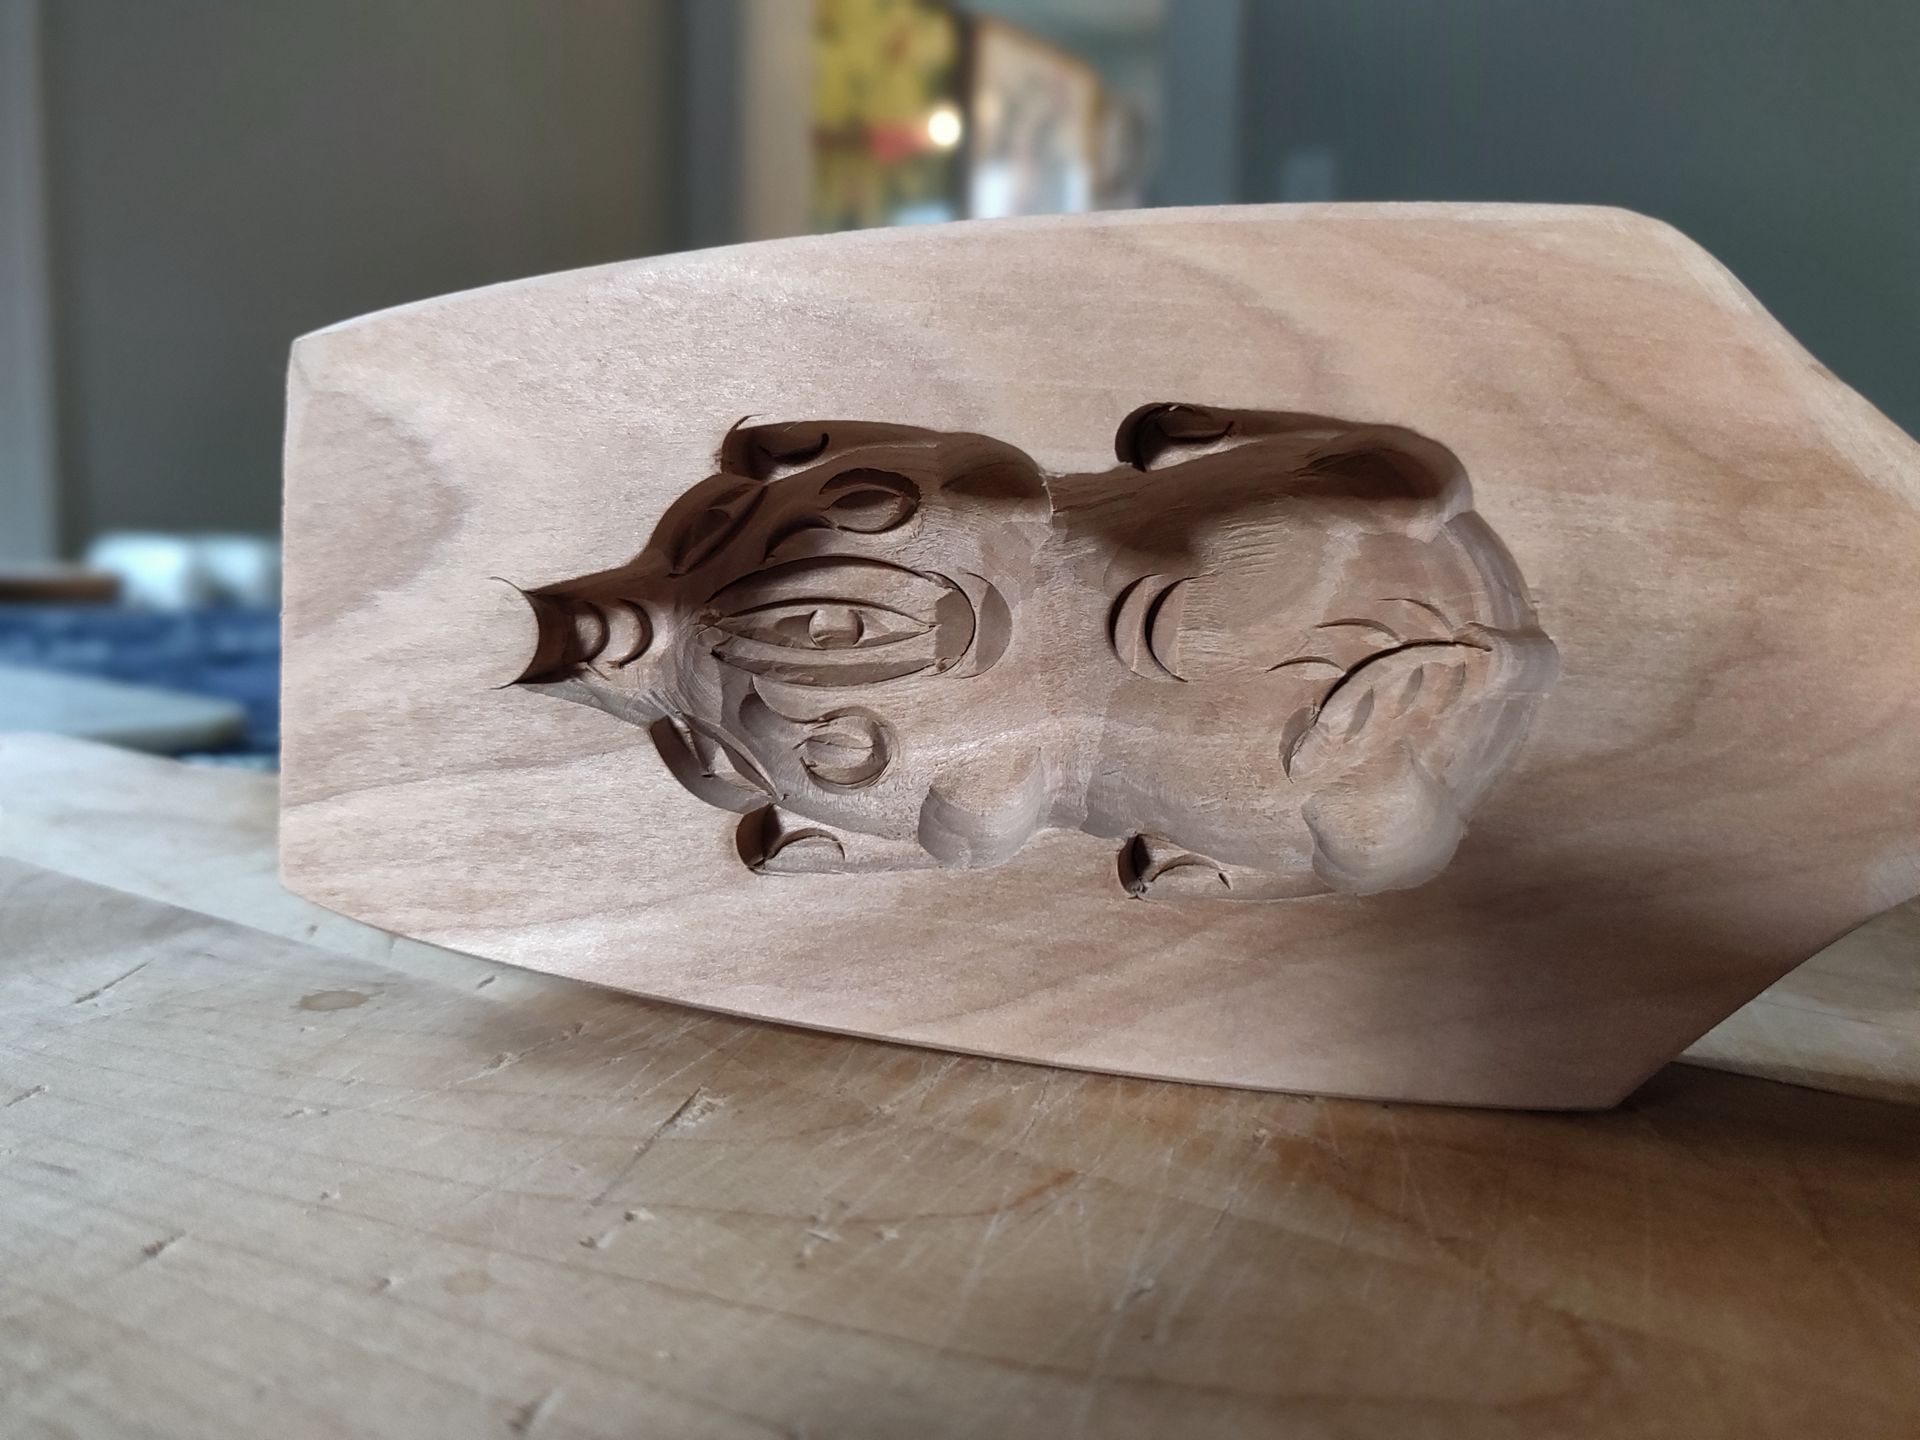 A wooden sculpture of a pig is sitting on a wooden table.